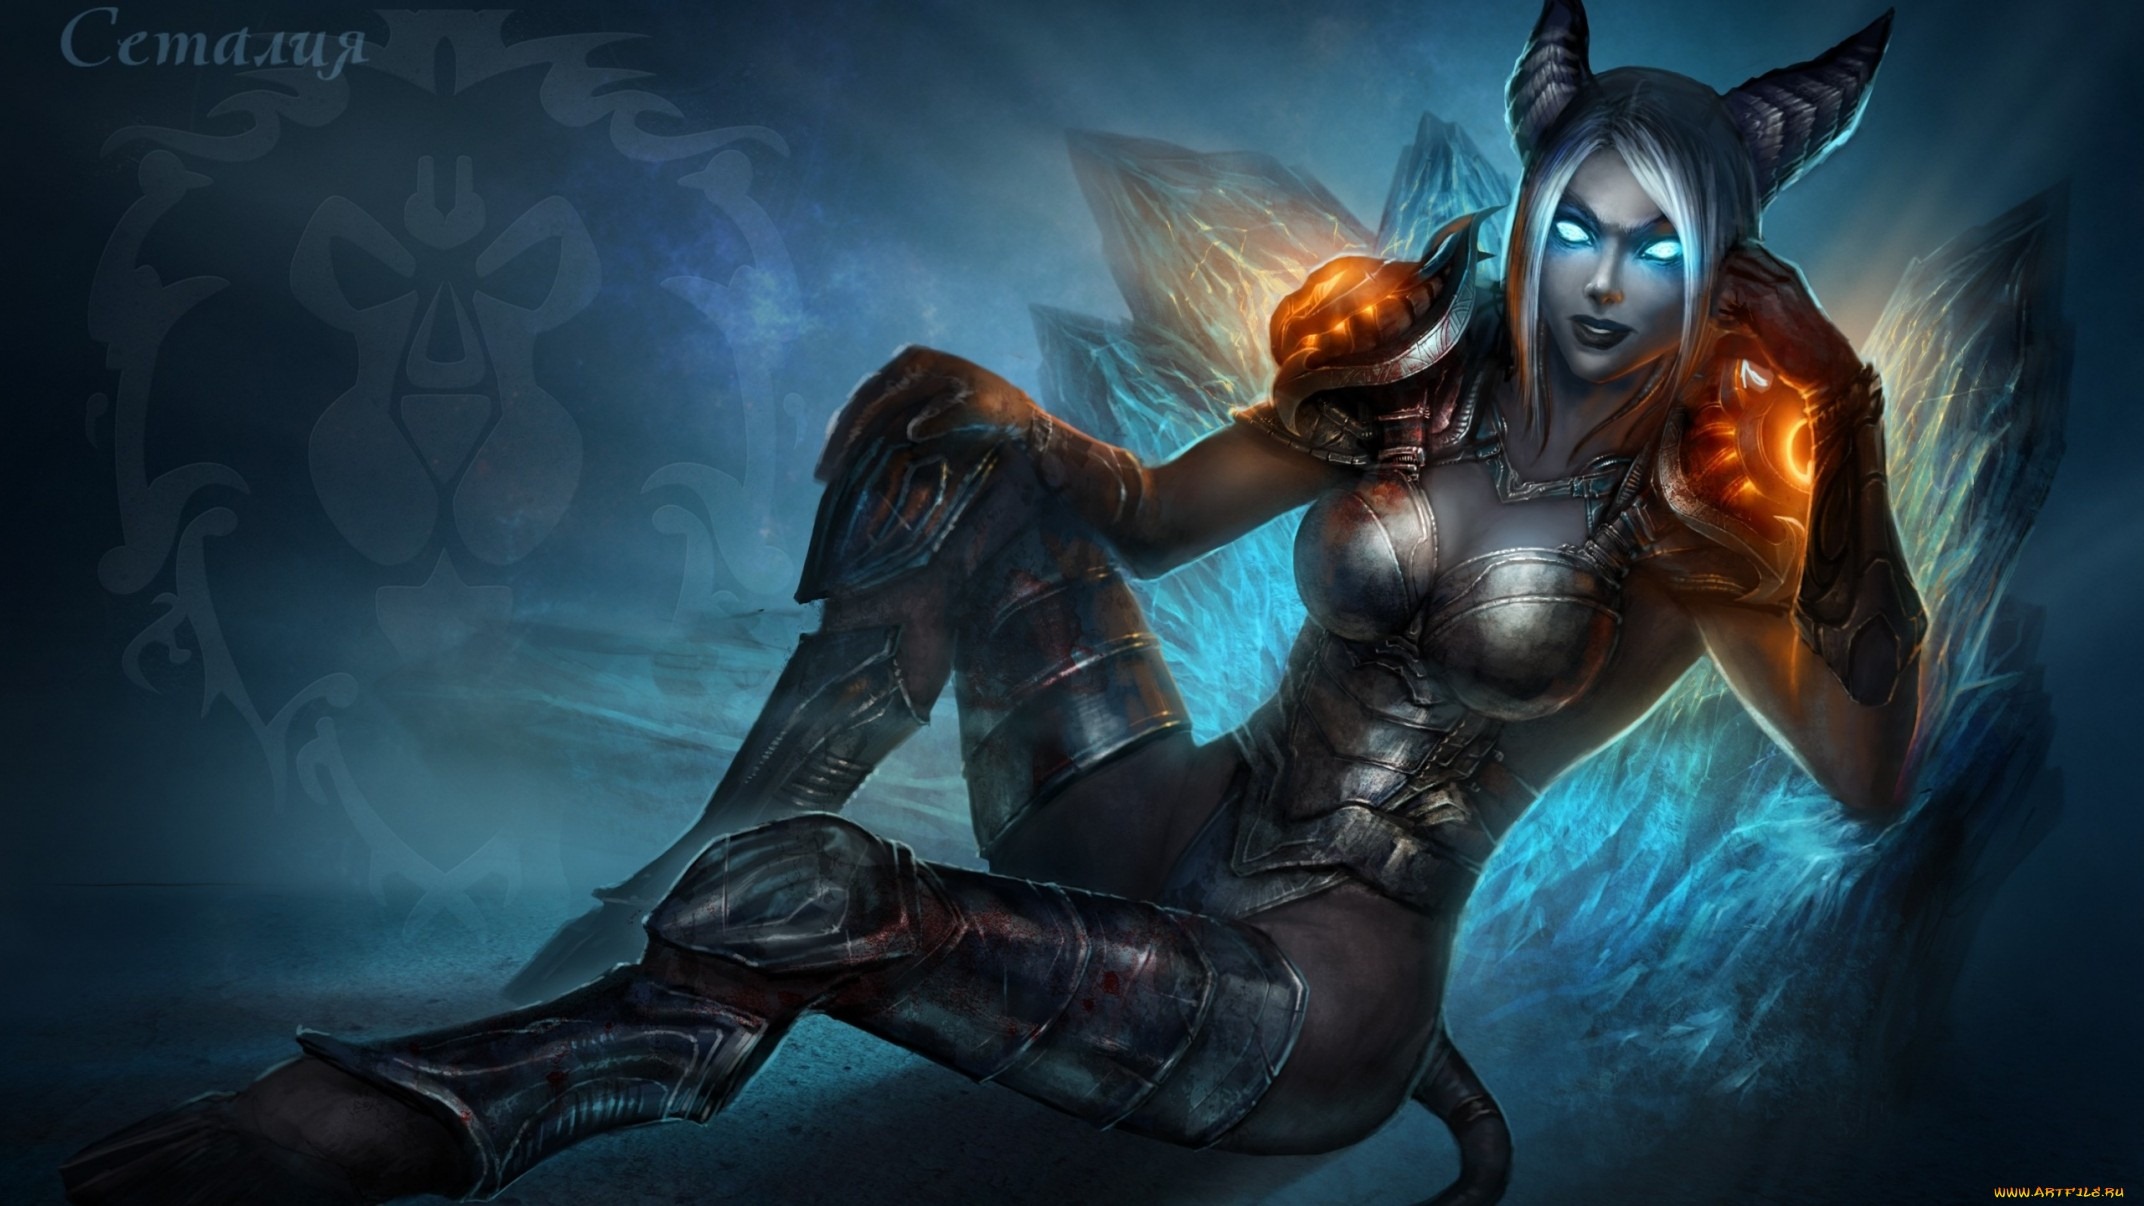  OF WARCRAFT DEMON GIRL WALLPAPER The best wallpapers collection